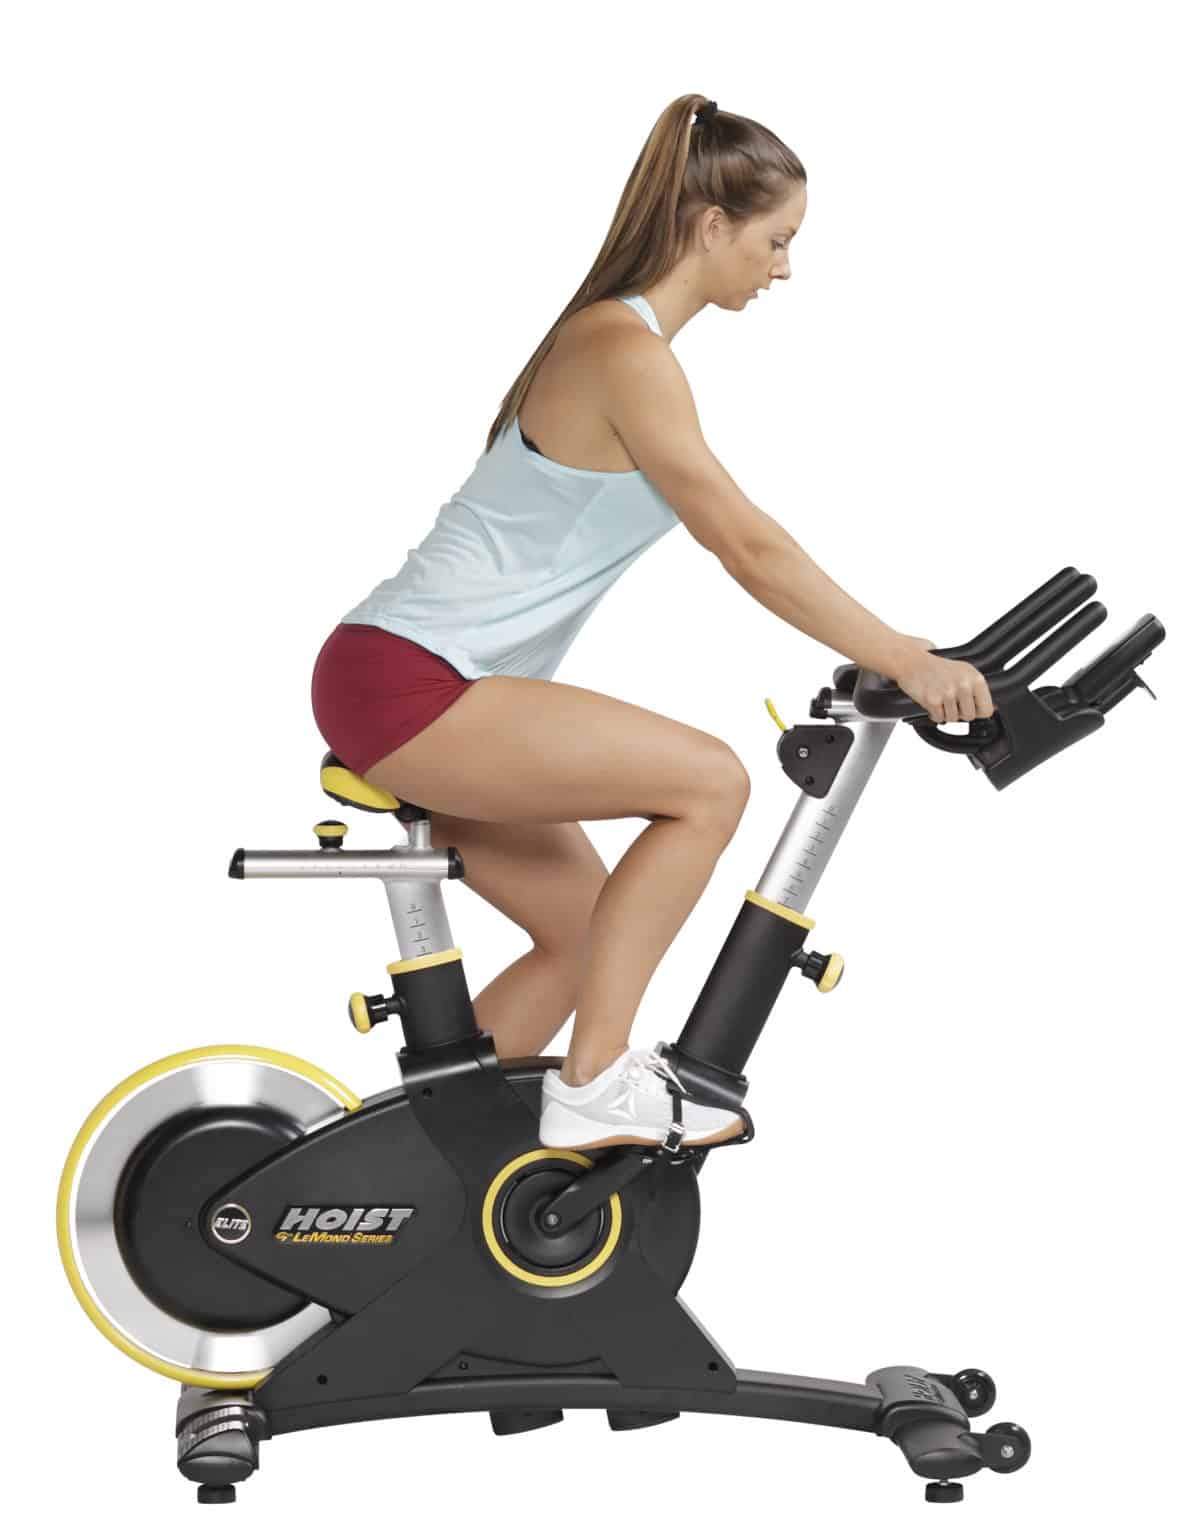 A woman is riding a stationary exercise bike